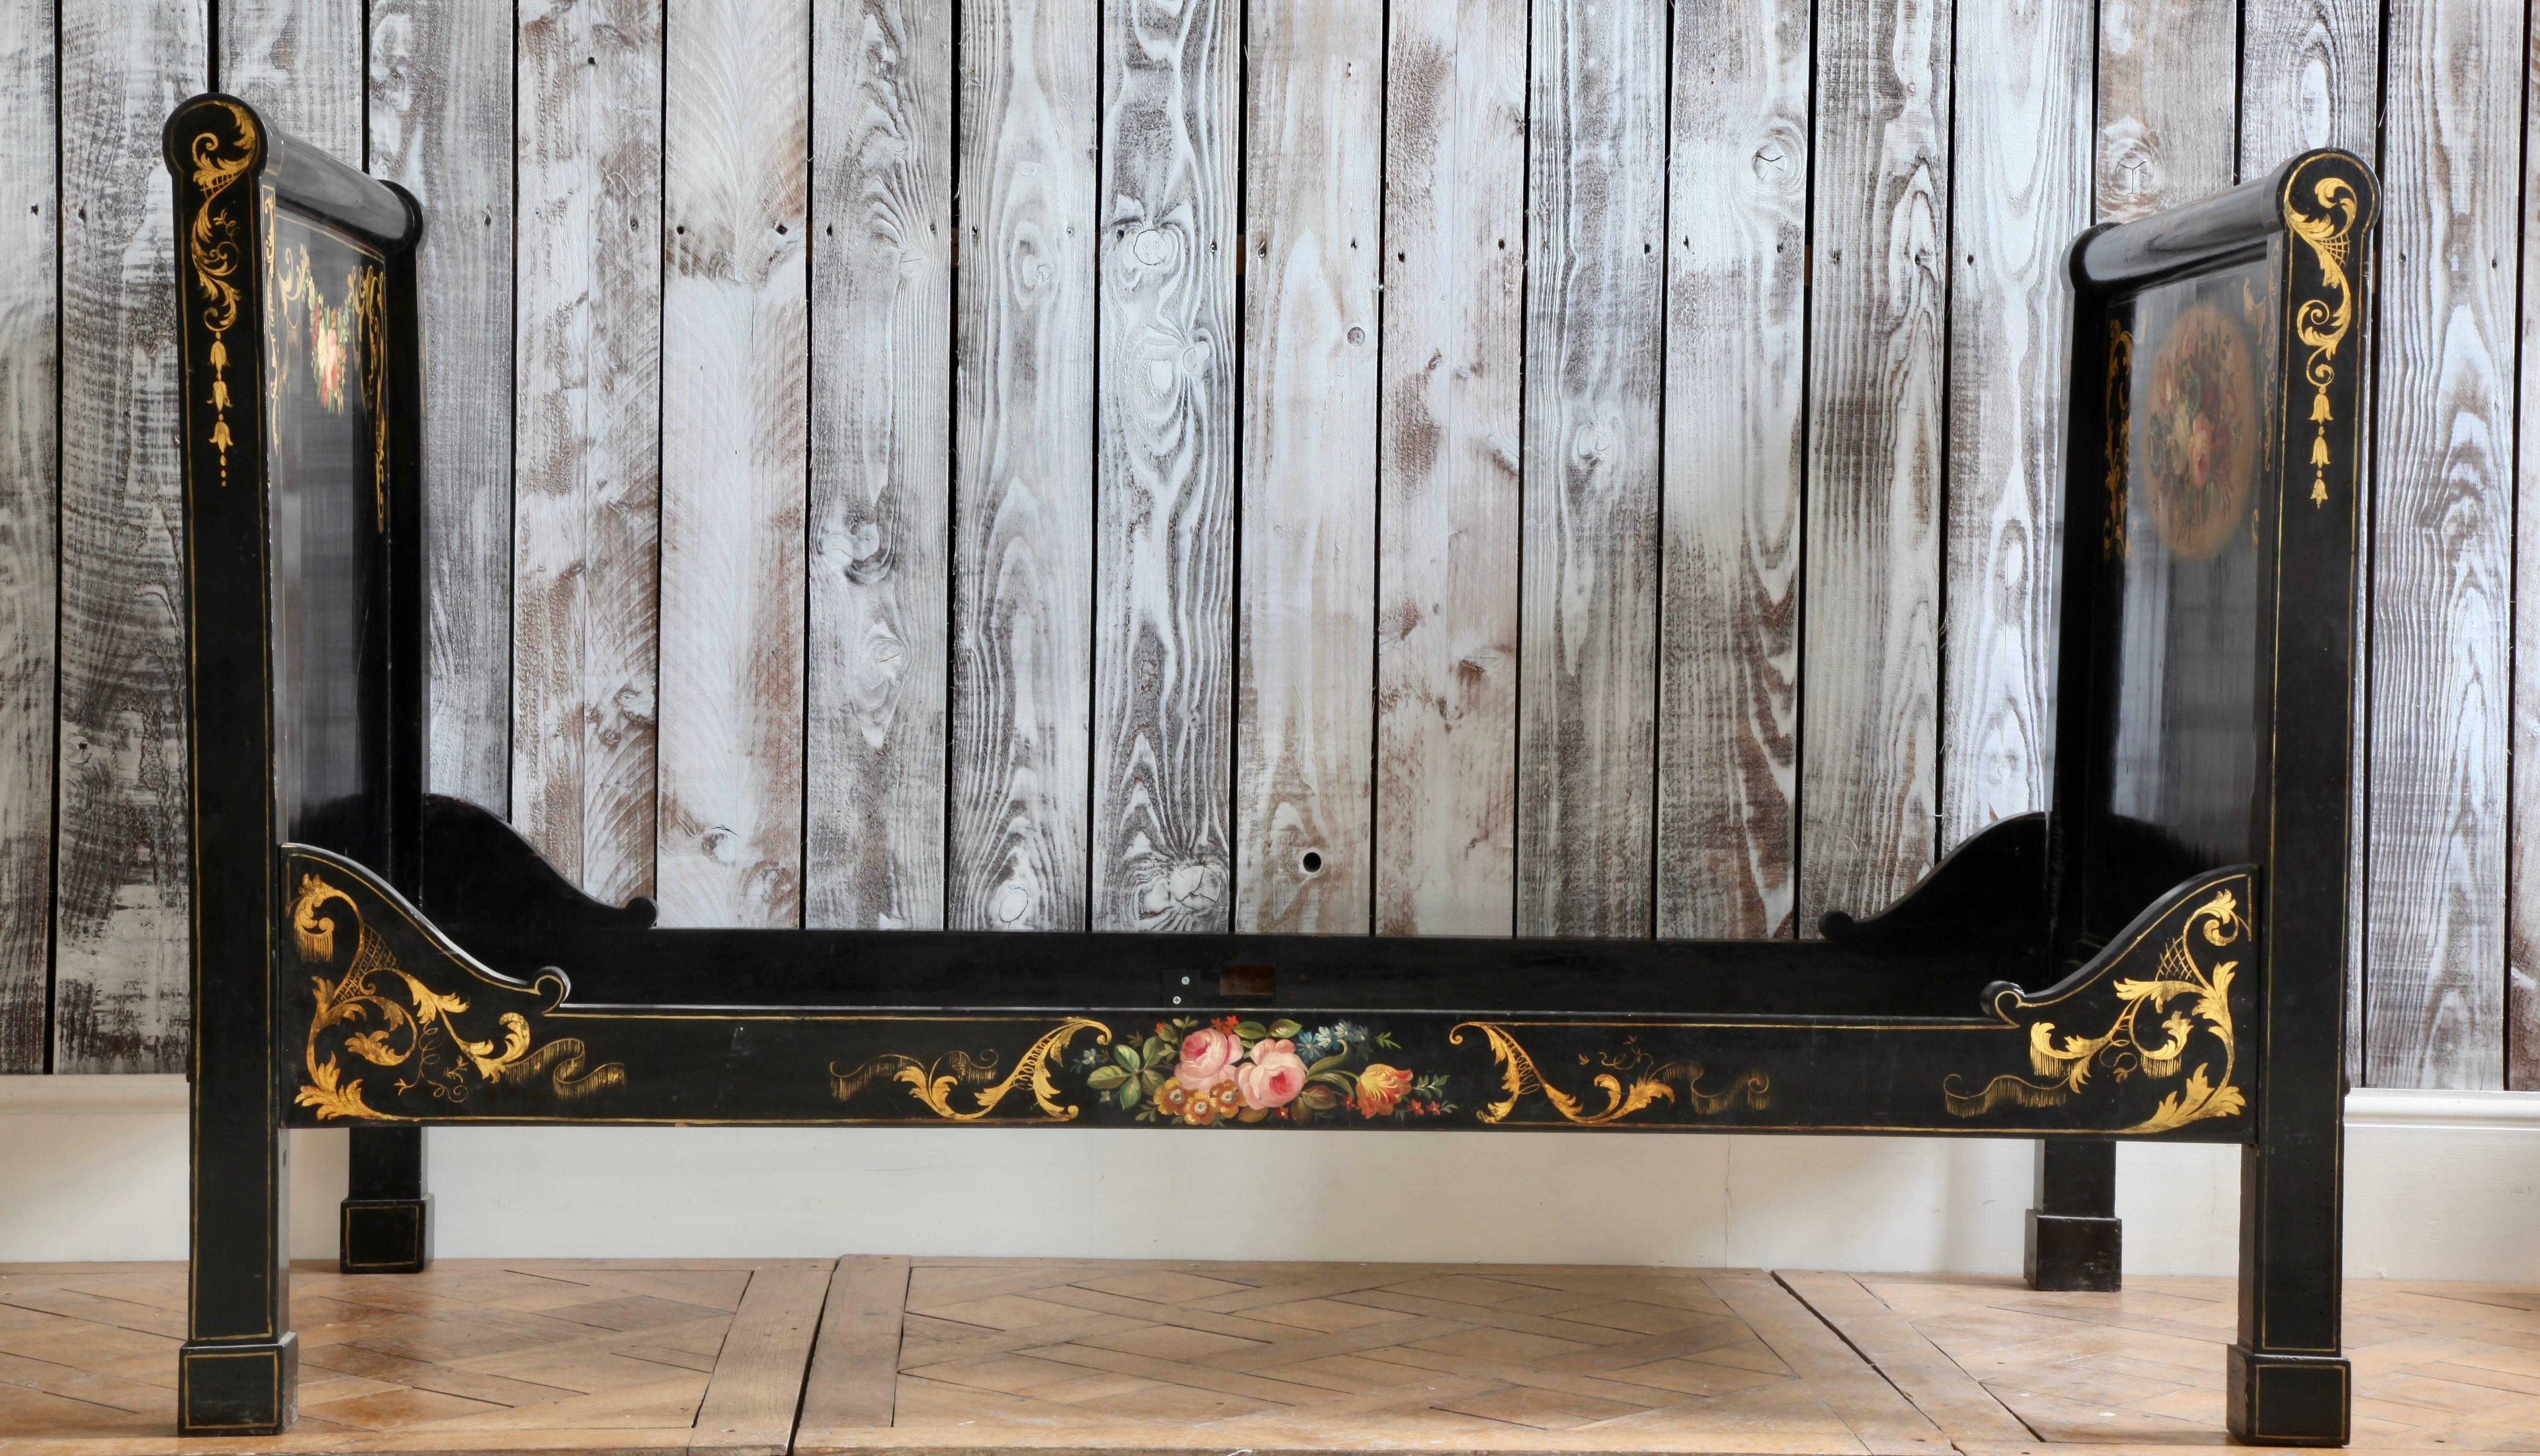 Hand-painted daybed, French, 19th century.

Mattress size: 2ft6 x 5ft9' or 76 x 176cm

Beautiful hand-painted wood panels in vivid colors on a black lacquer background. Neat size, for a child's room or as a sofa/bed where space is a